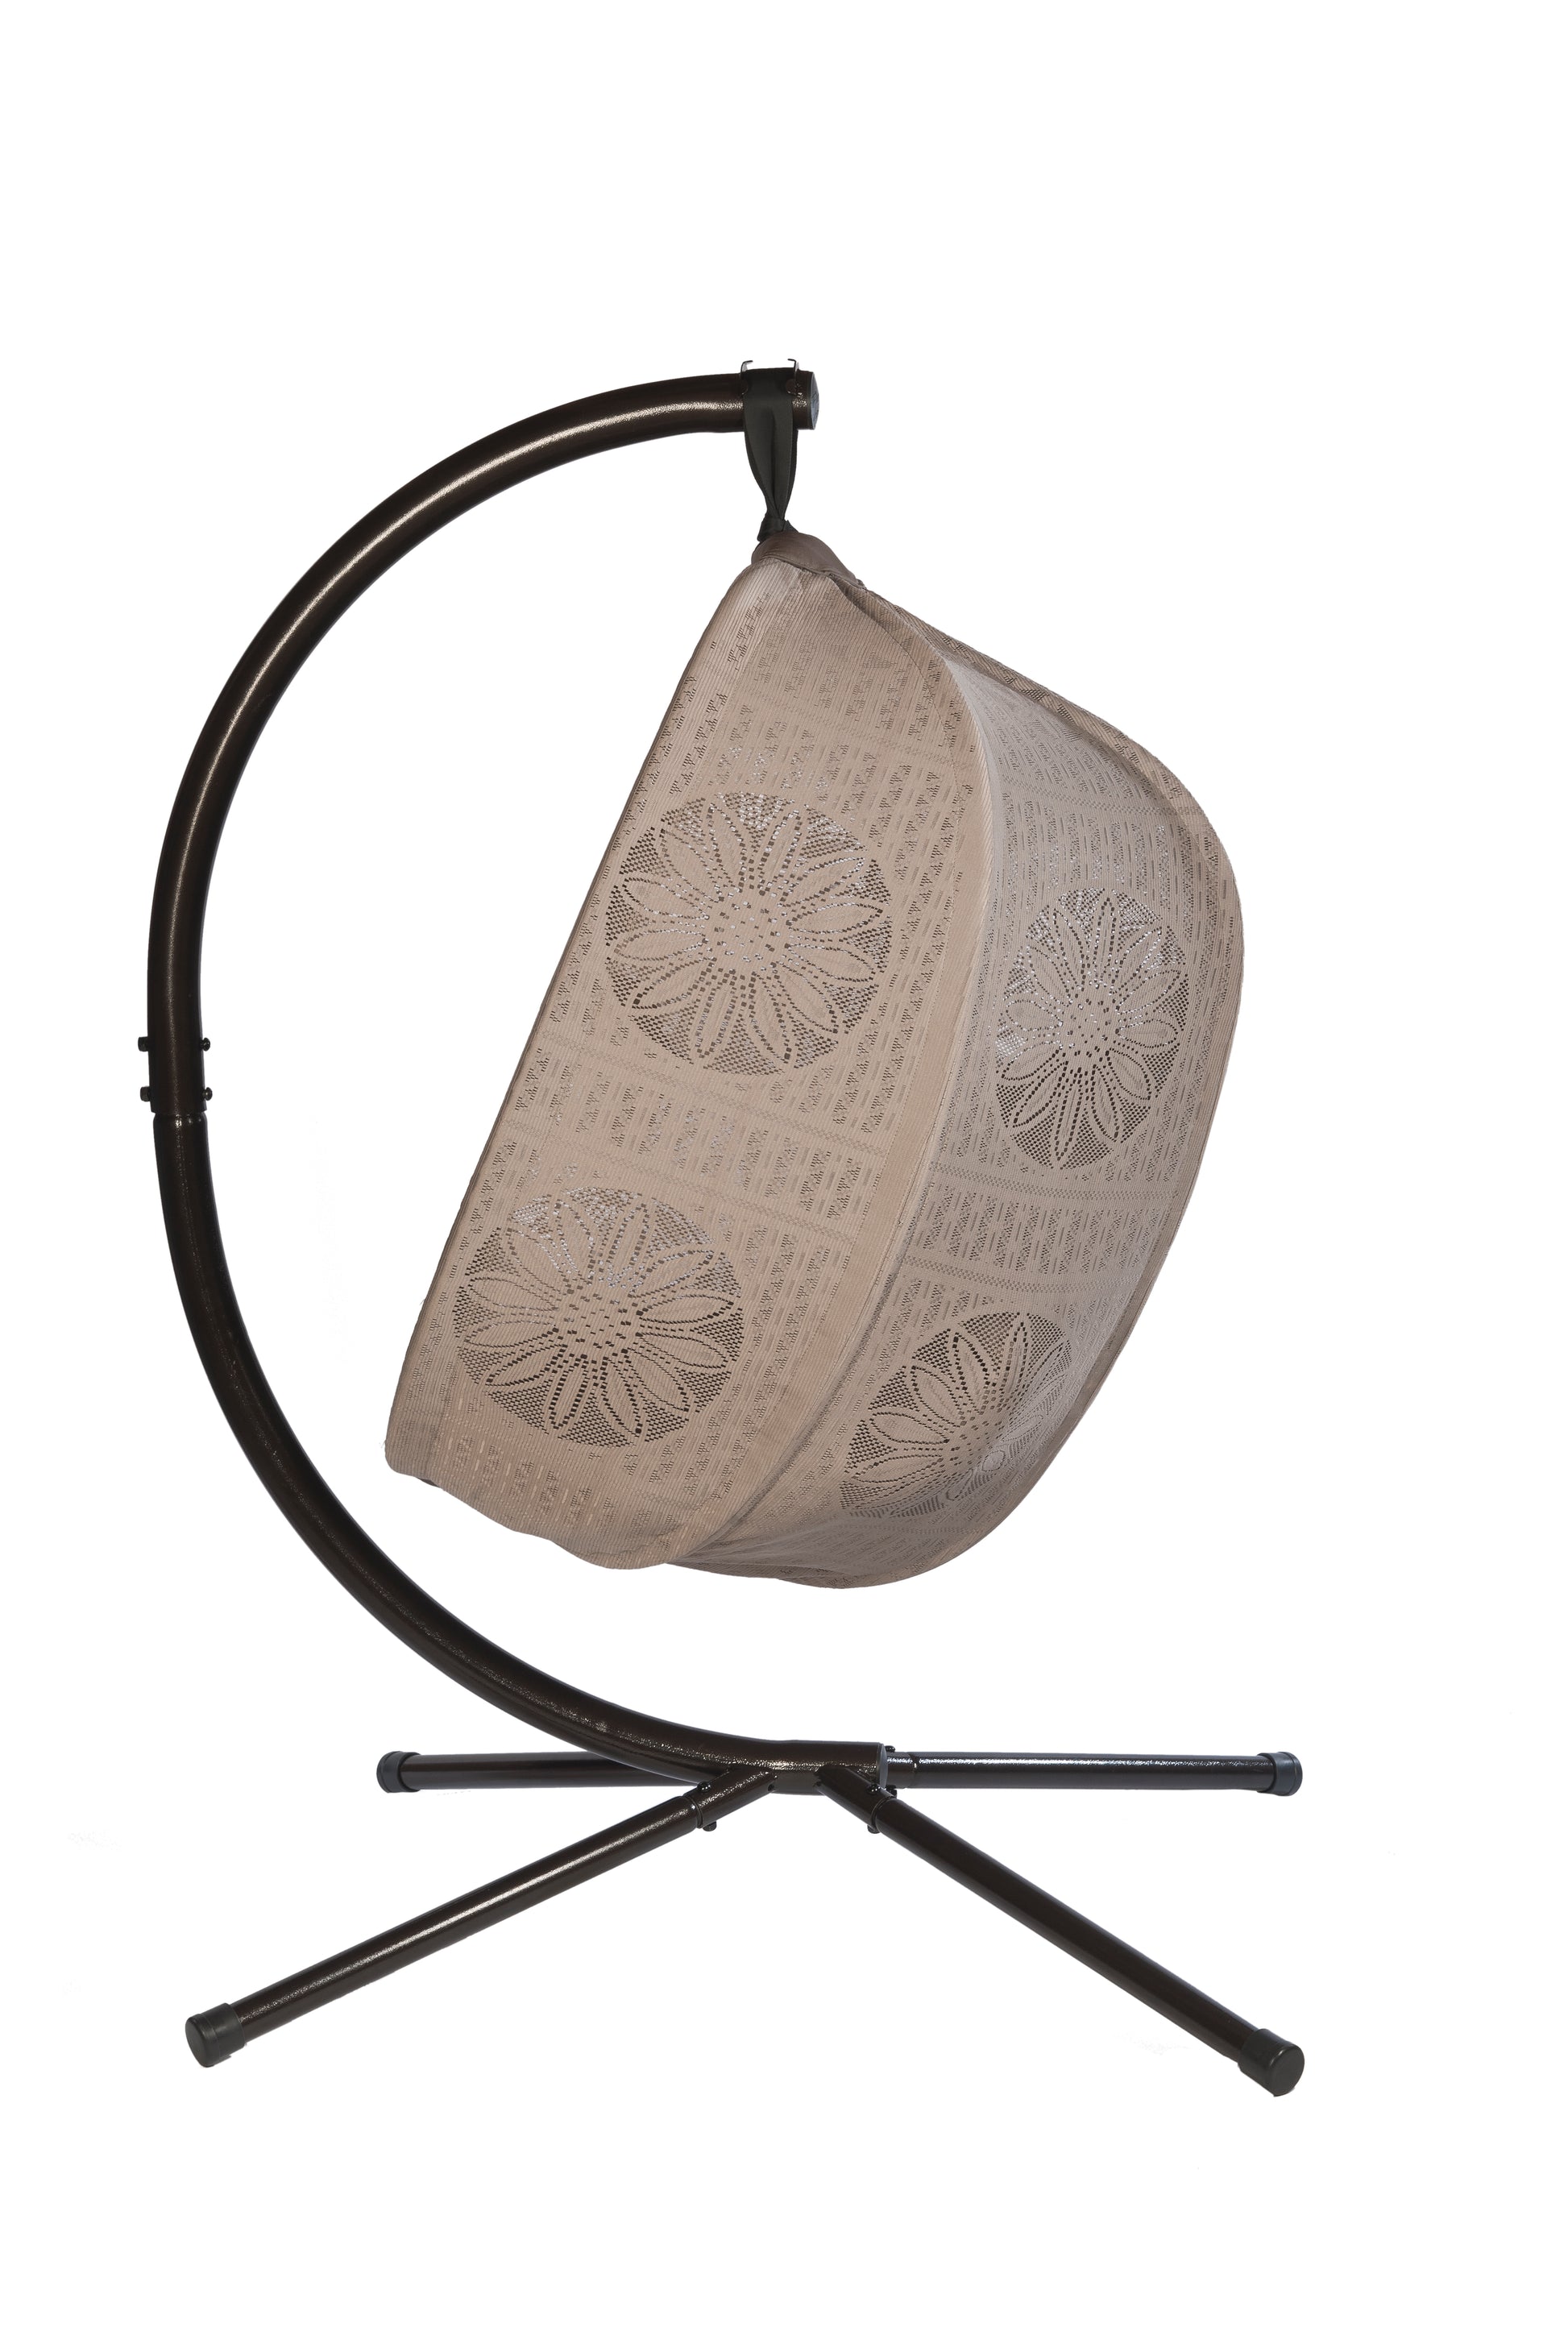 FlowerHouse Hanging Egg Chair - Dreamcatcher with stand - side view